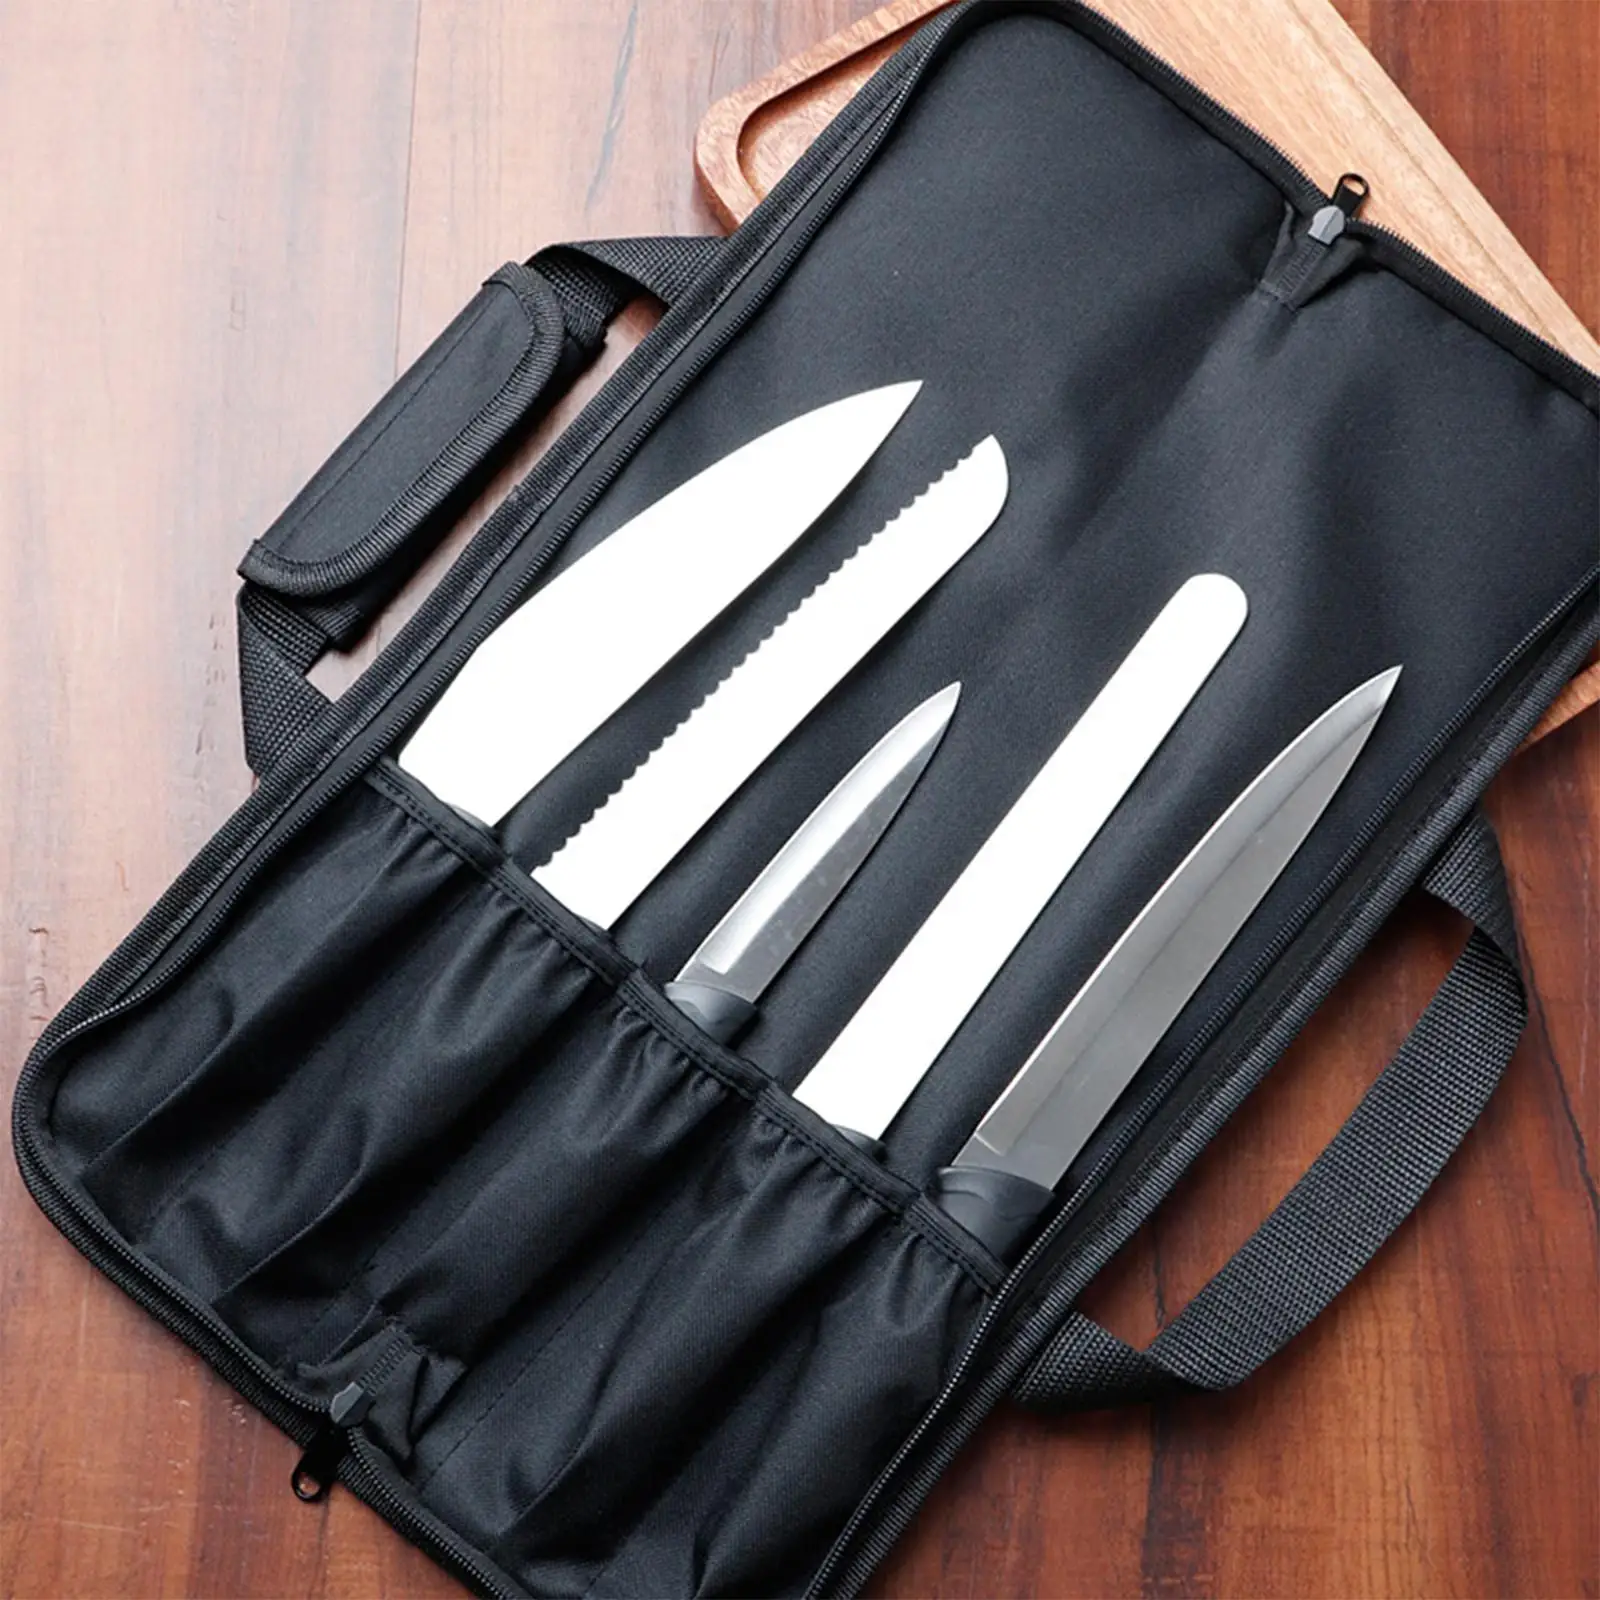 Bag Cooking Tools Storage Tool Bag Carry Case for Travel Picnic